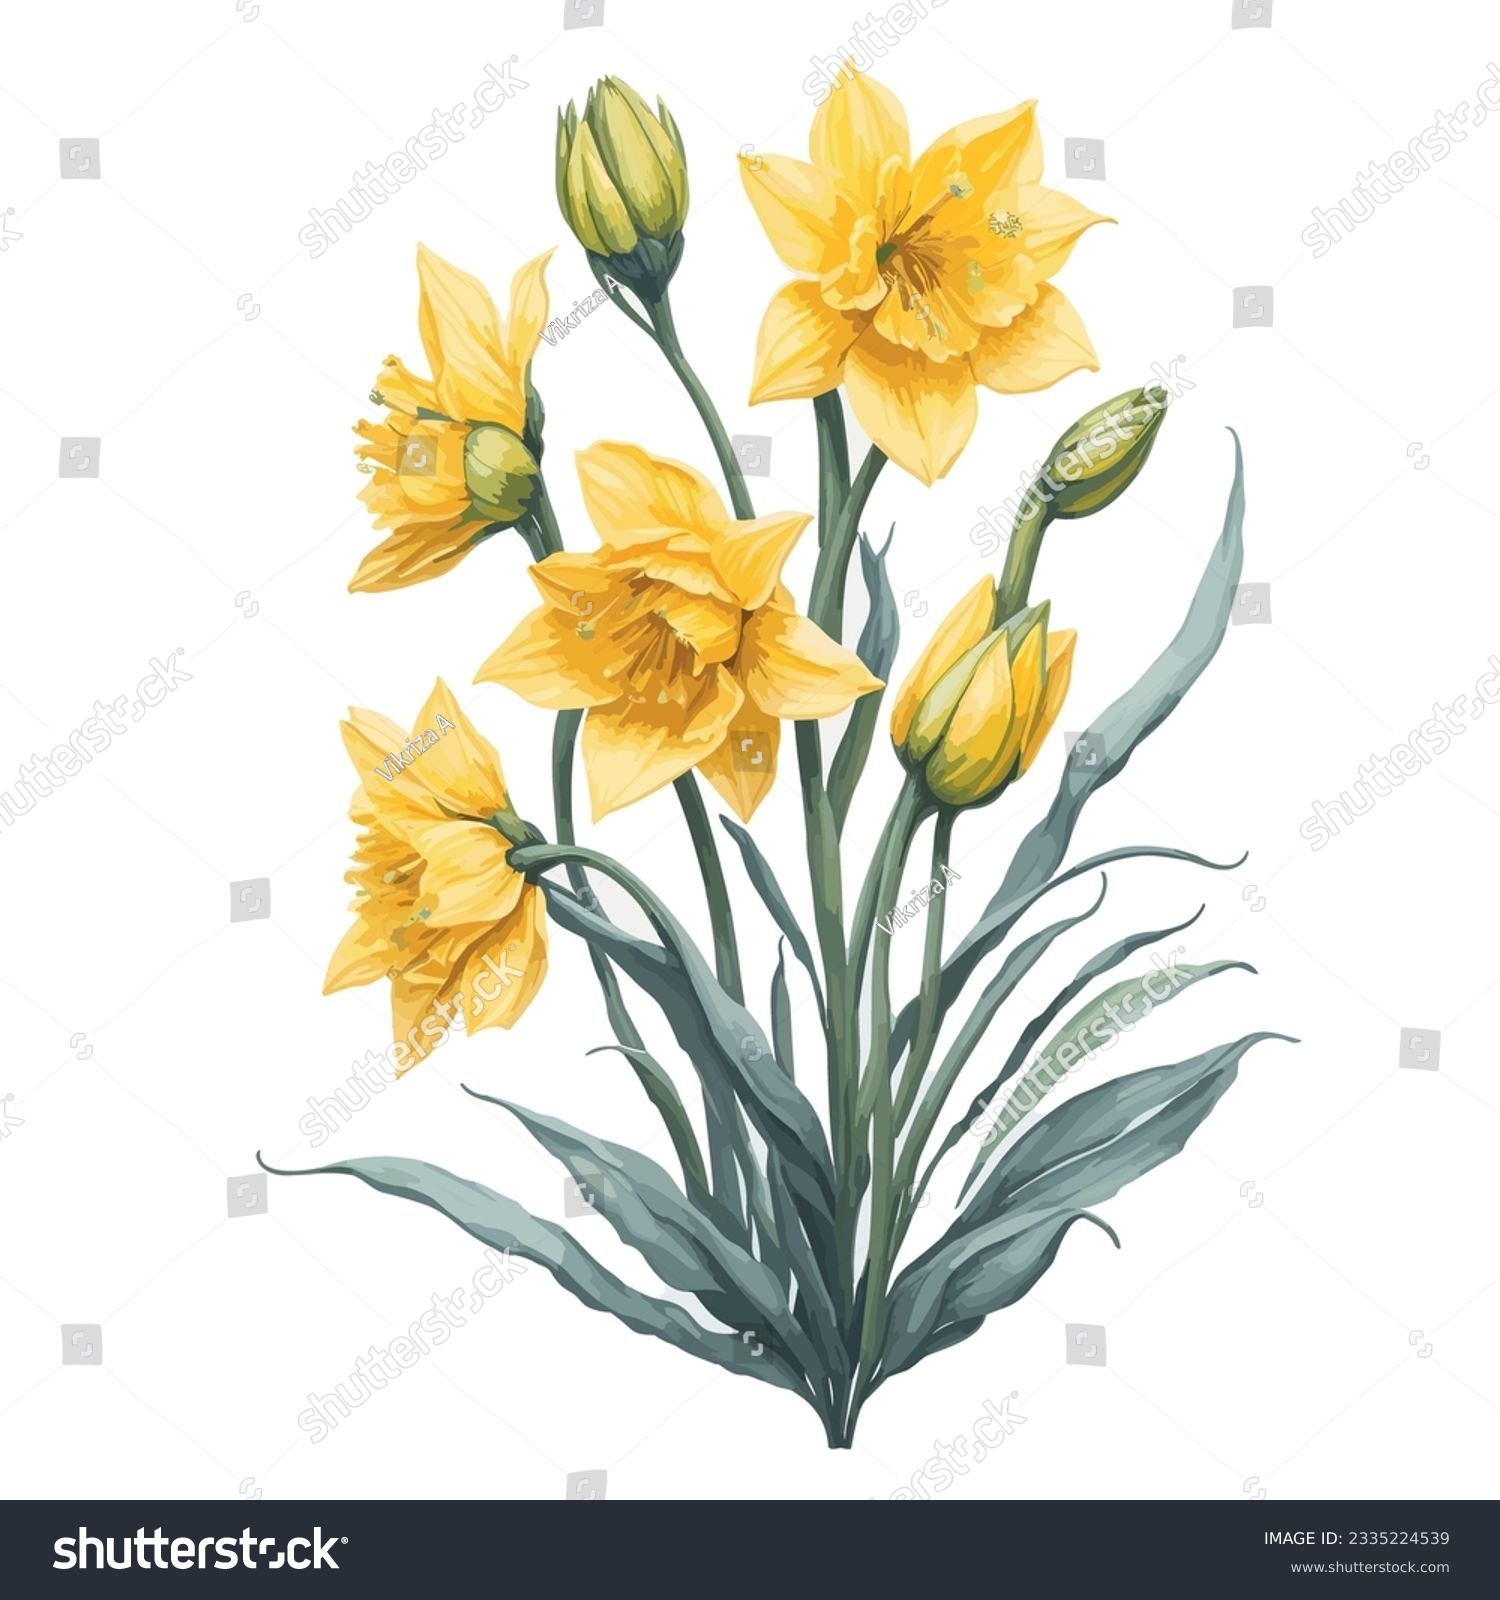 SVG of Watercolor Daffodil Jetfire Vector: This stunning vector illustration showcases the vibrant beauty of the Daffodil Jetfire flower in a watercolor style. svg